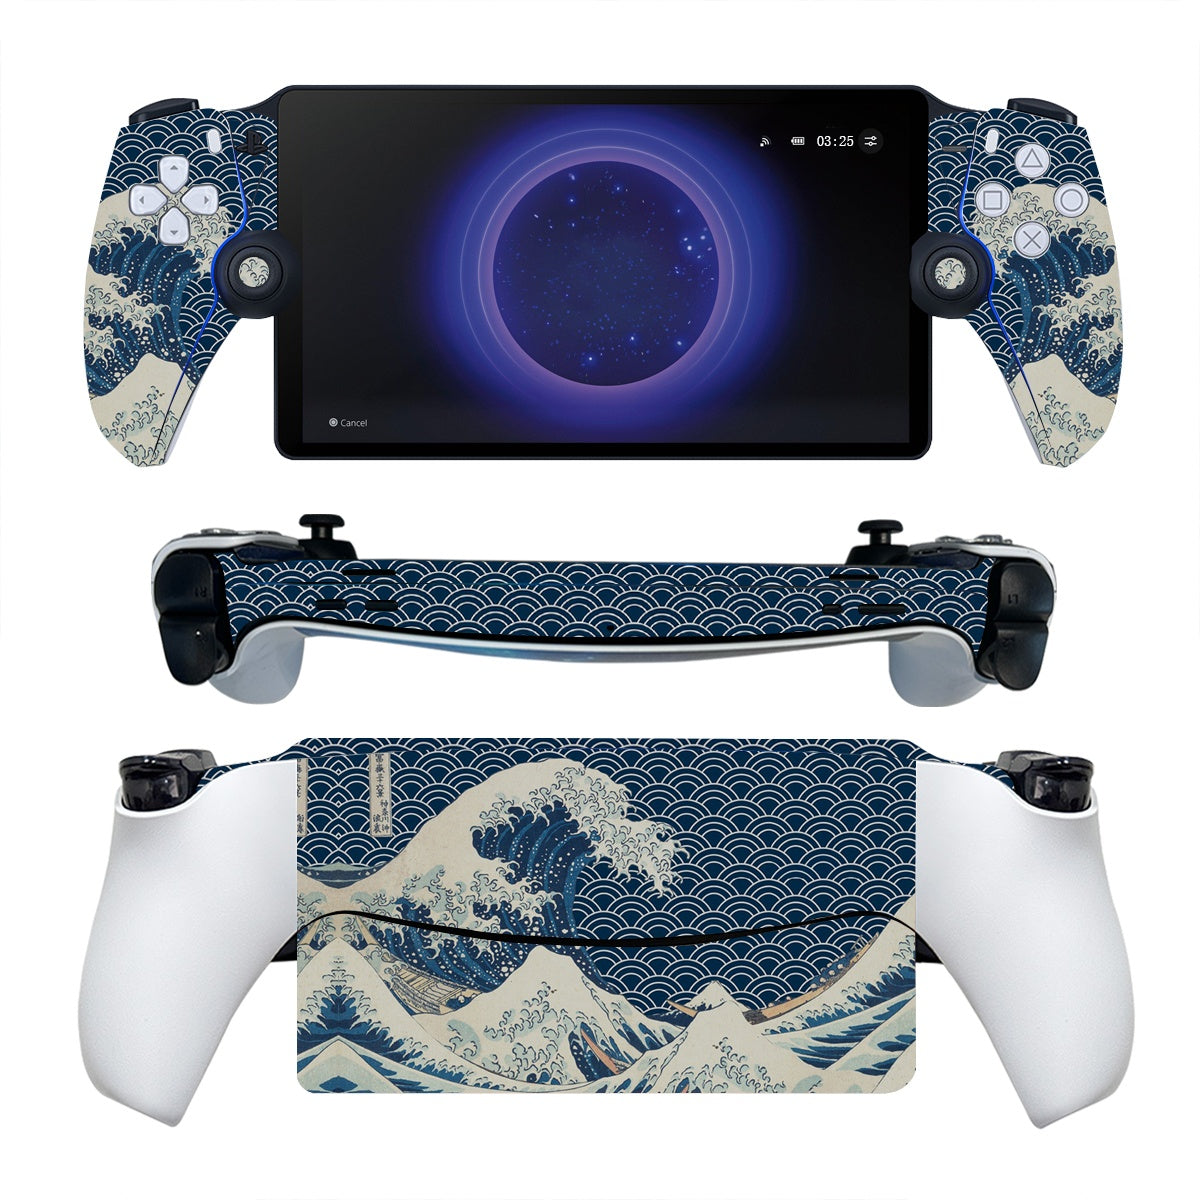 A visually stunning PlayStation Portal Protector Skin titled 'Great Wave,' drawing inspiration from the famous Japanese woodblock print. The skin showcases a turbulent sea with crashing waves, rendered in vibrant shades of blue and white. The intricate details capture the dynamic energy of the waves, creating a captivating design for protecting and customizing your PlayStation console. The Great Wave Skin adds a touch of artistry and style, transforming your gaming setup into a visually striking masterpiece